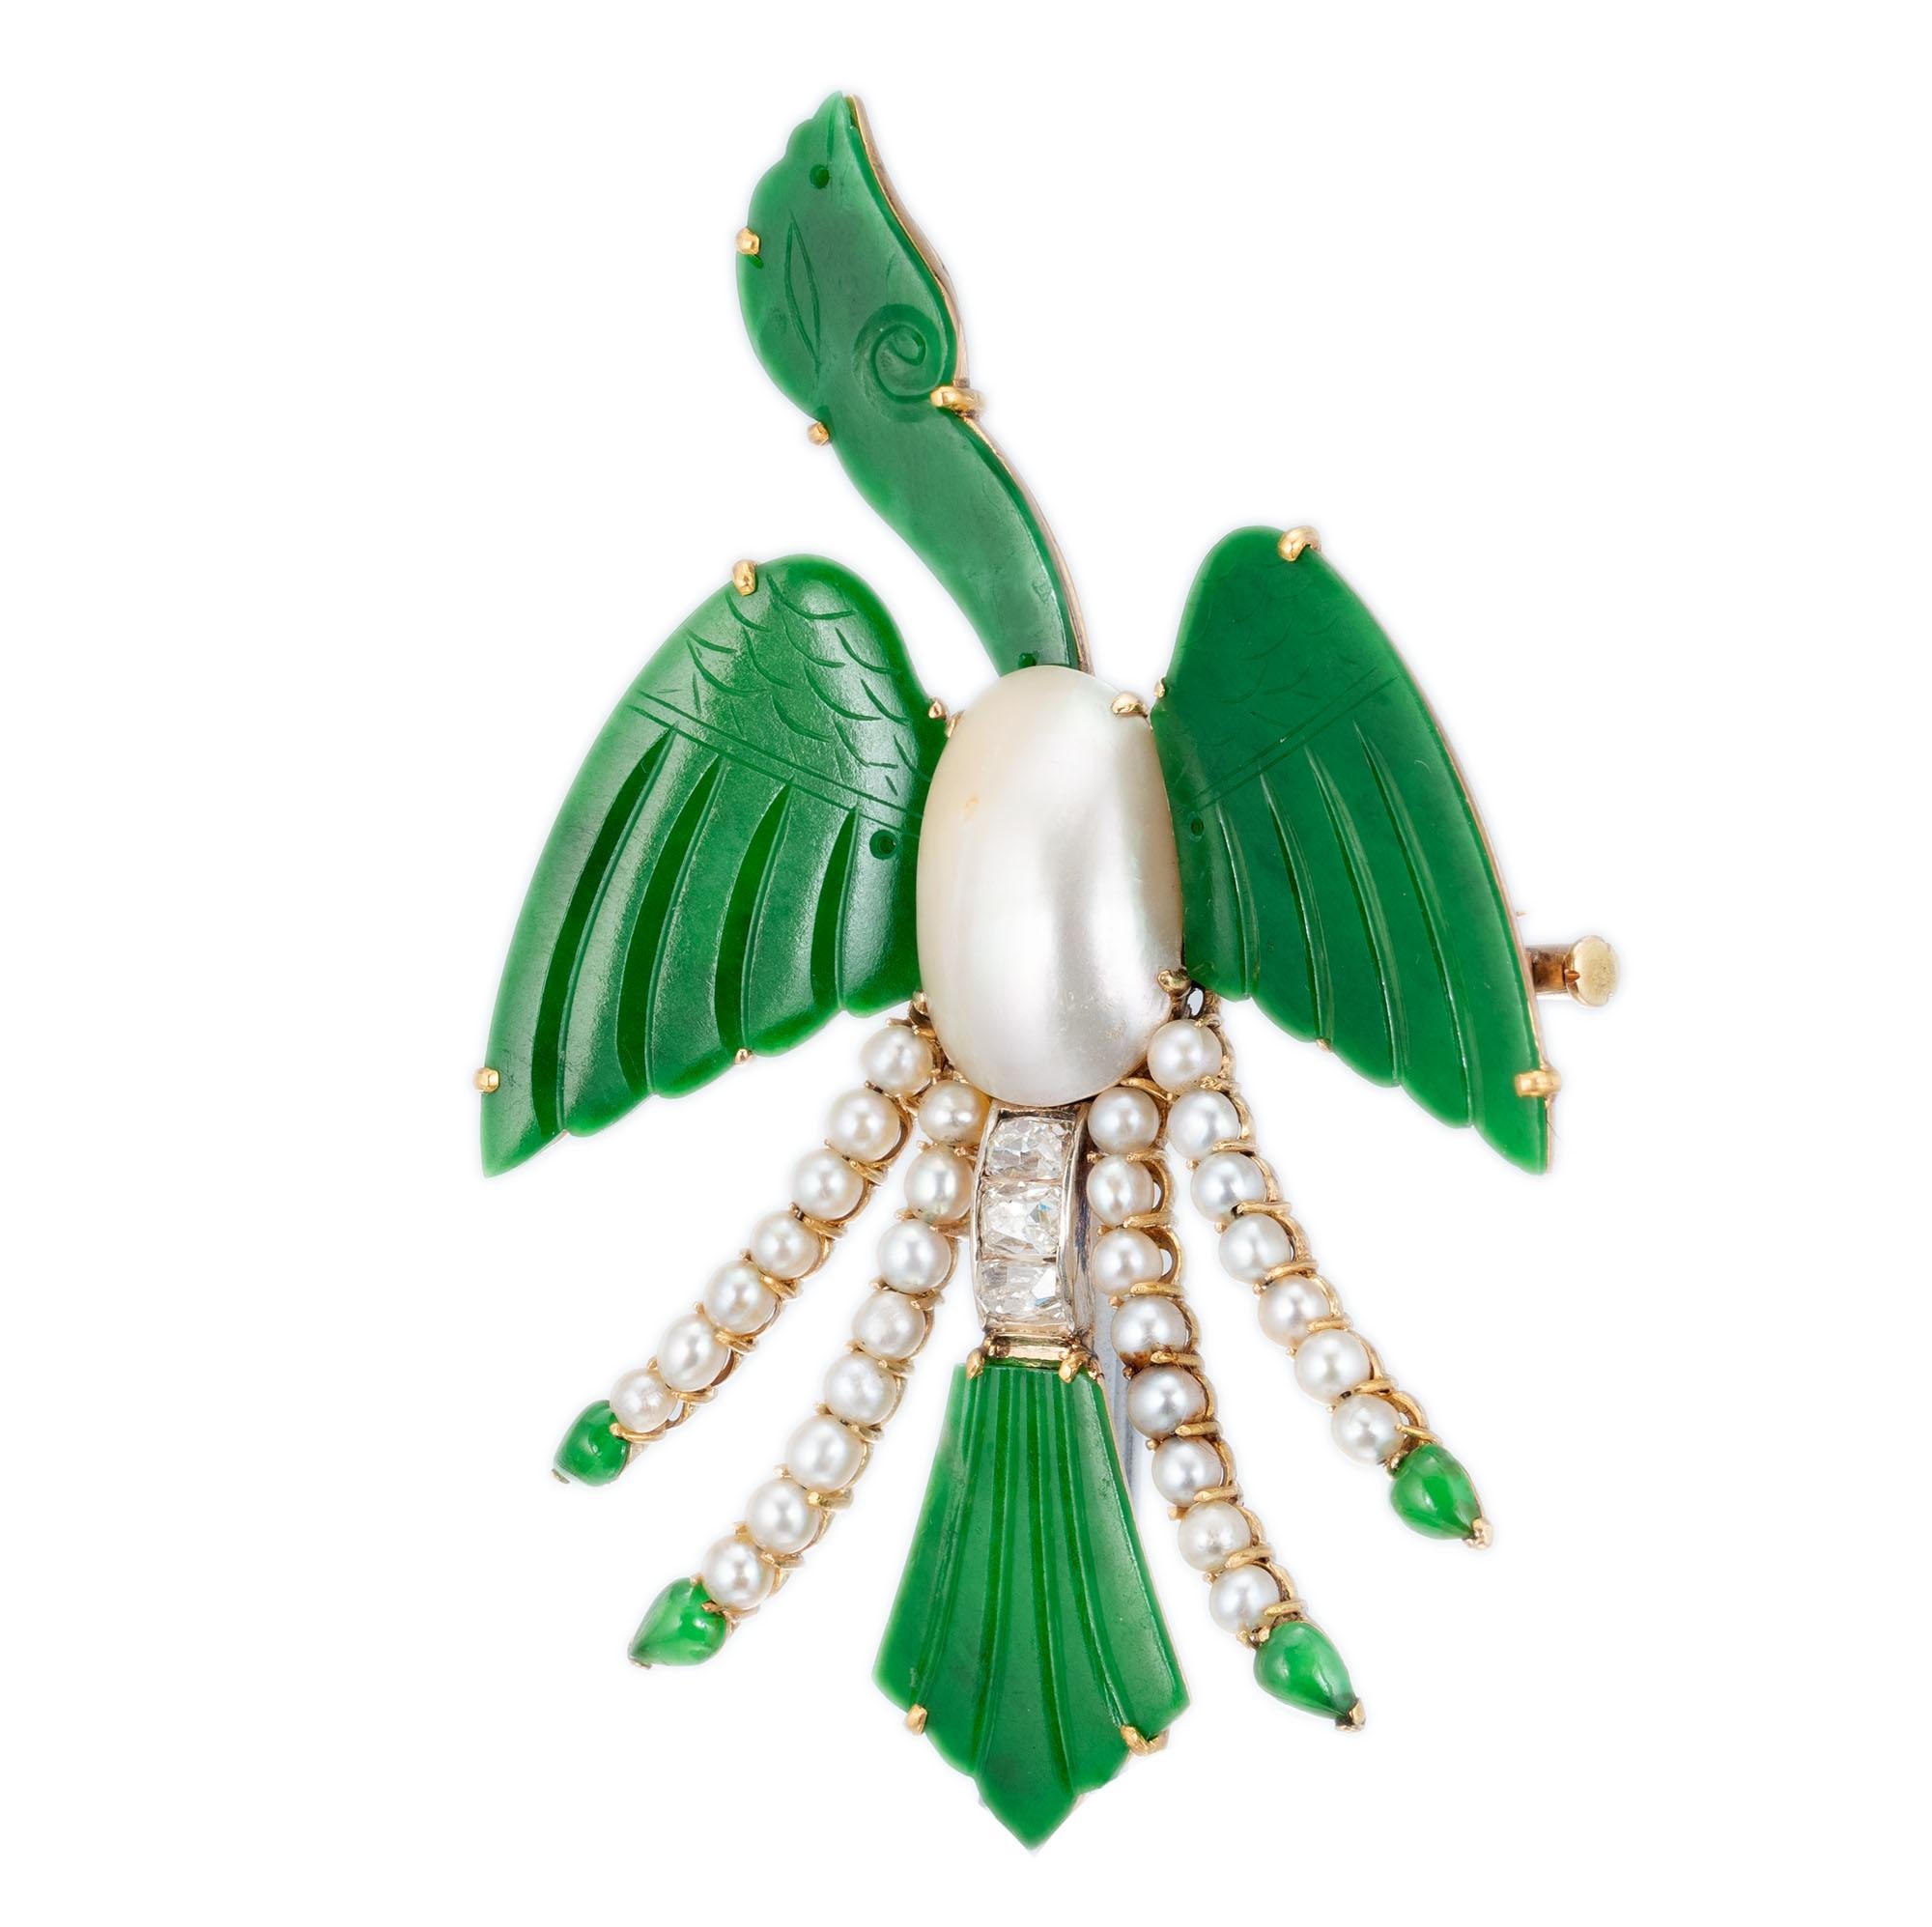 Natural untreated jadeite jade bird brooch with diamond and pearl accents. Handmade in 18k yellow gold 

4 pierced carved green jade GIA Certificate # 5202642859
4 pear cabochon green jade 
1 oval mabe Ivory hue pearl
30 round gray crème pearls